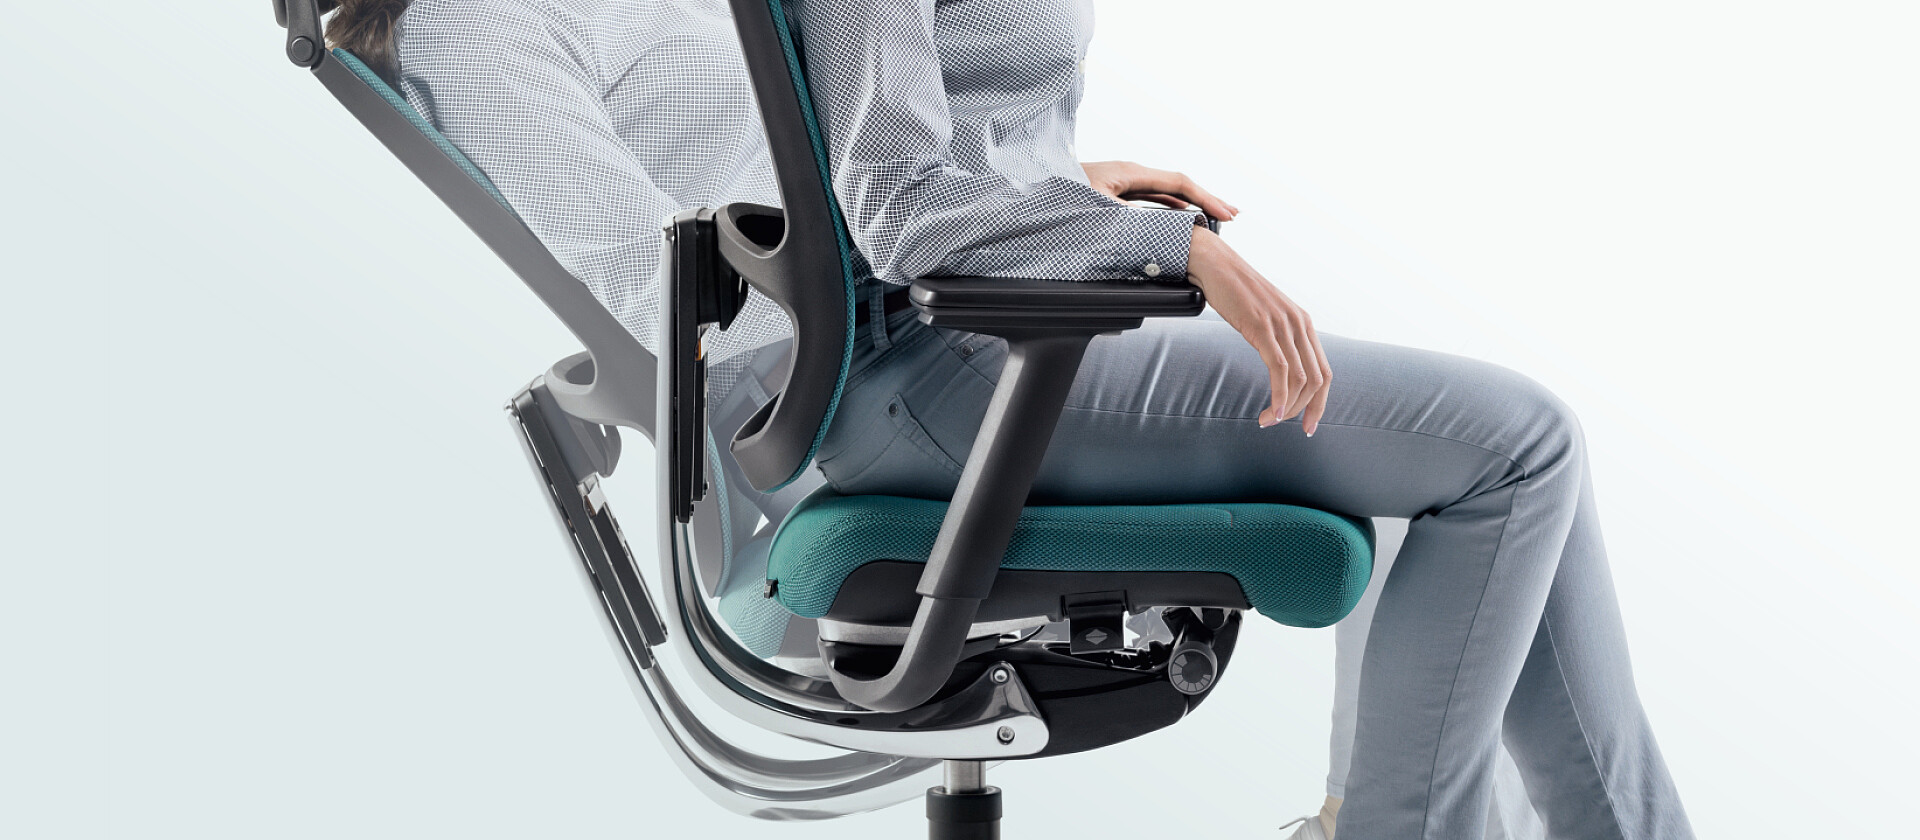 Ergonomic Office Chair - Healthy and Comfortable Seating with Sedus